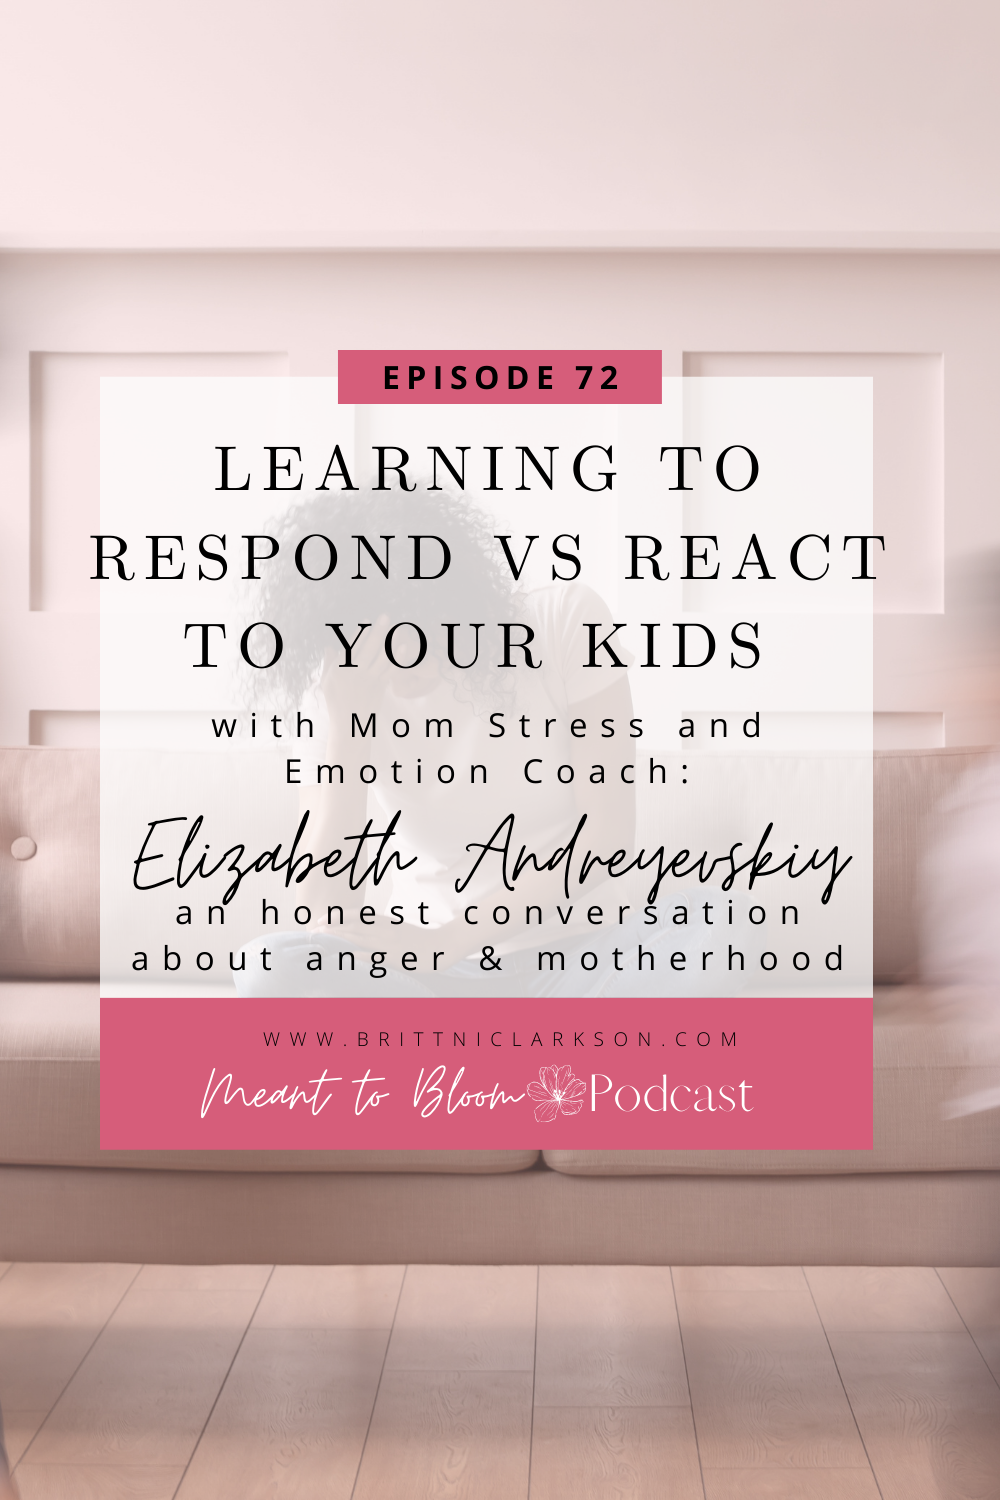 Learning to Respond vs React to Your Kids with Elizabeth Andreyevskiy (an honest conversation about anger & motherhood)